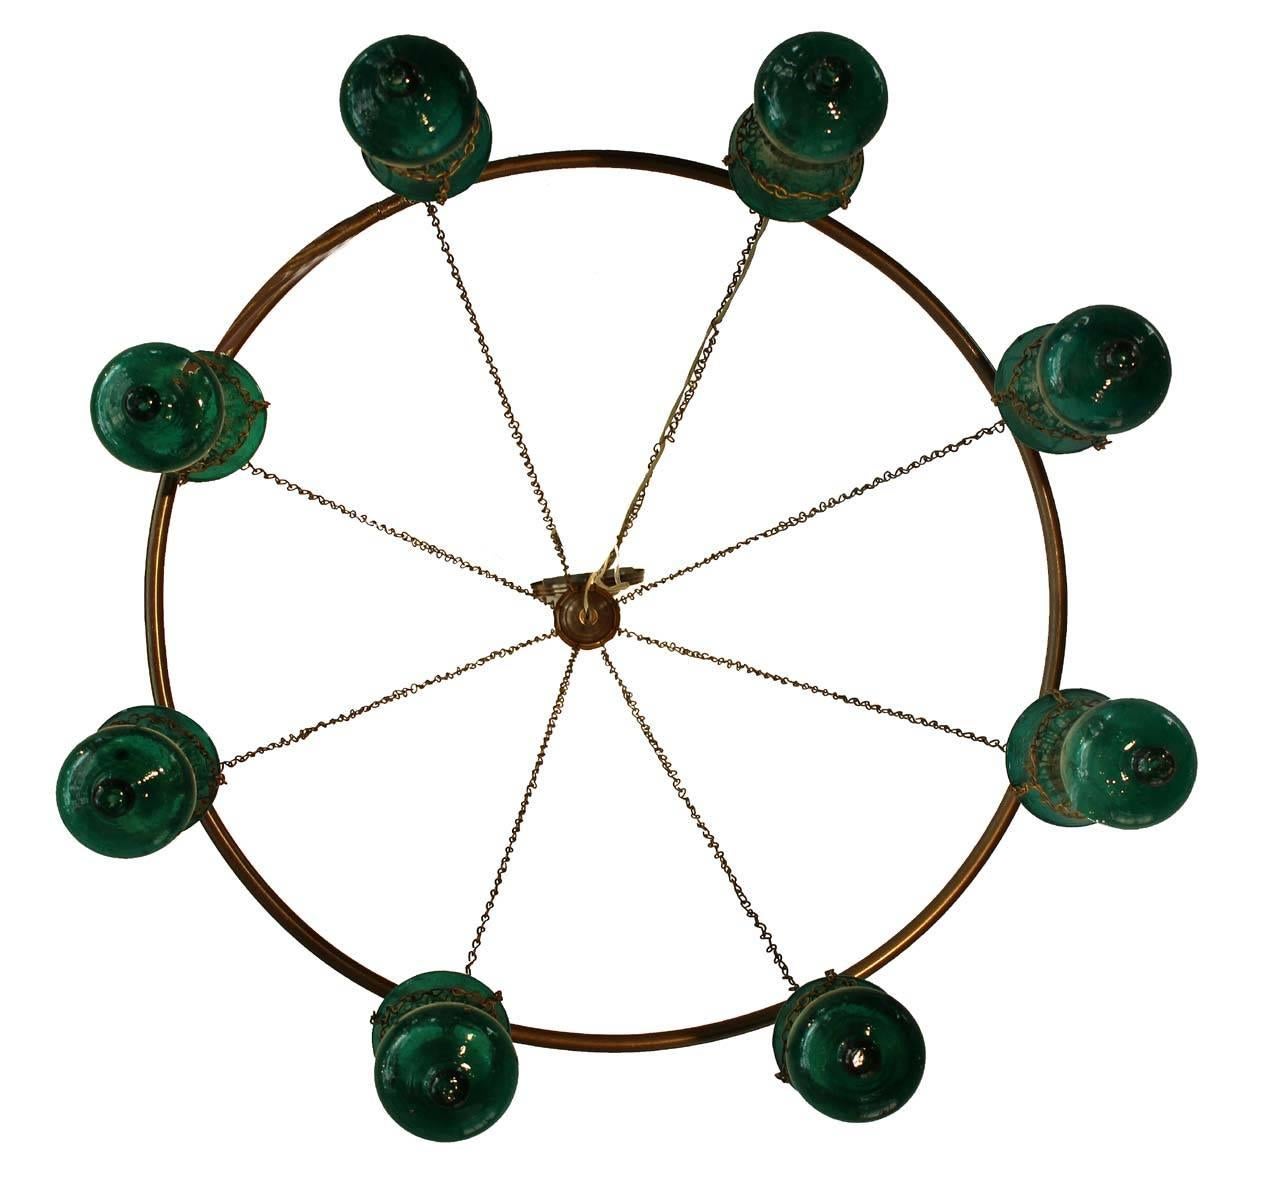 Amazing Egyptian glass chandelier. Eight jar large handblown green glass with a brushed brass ring and chain. Amazing look and can be custom-made in multiple sizes and colors. In the world of original lighting you will not find many options of this